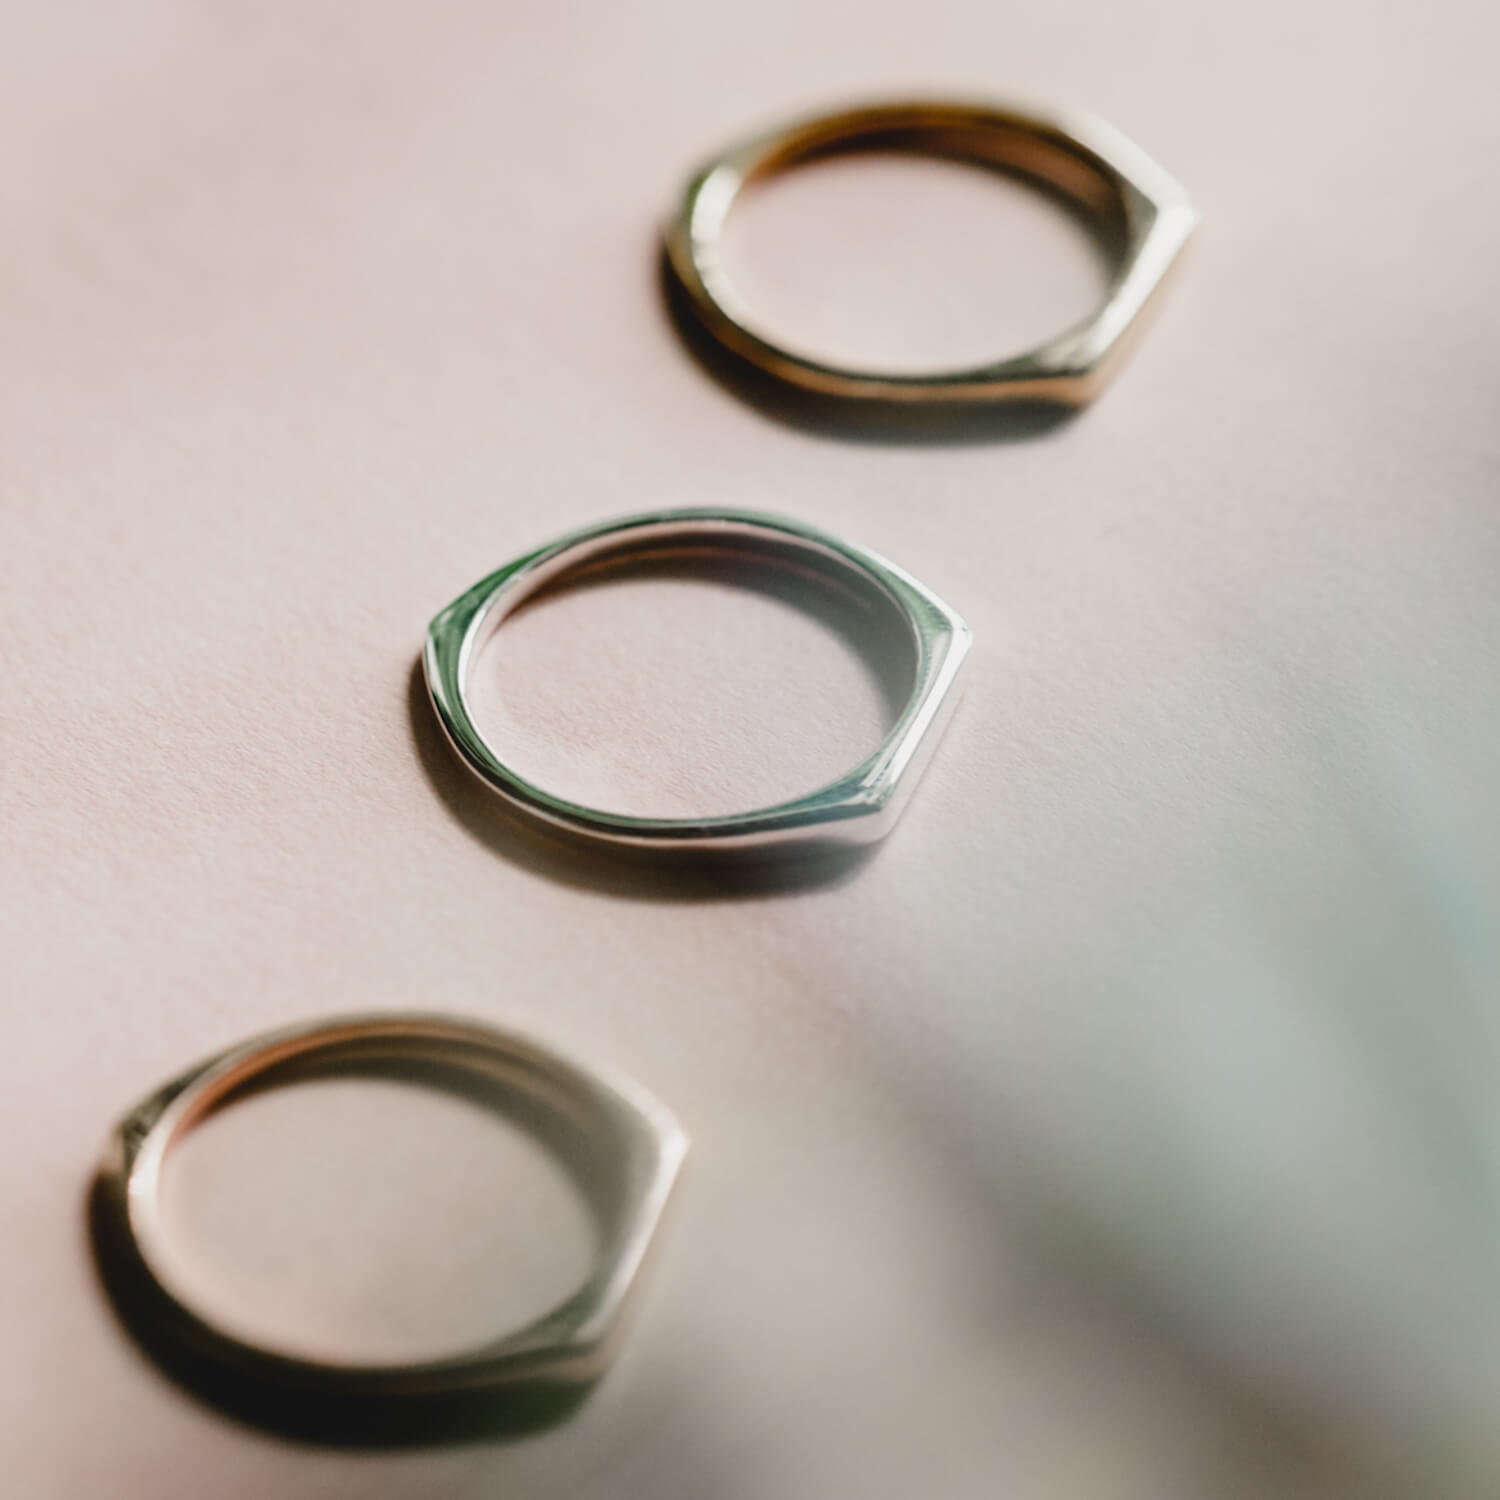 Close up of three thin signet rings, one in rose gold, one in gold and one in silver